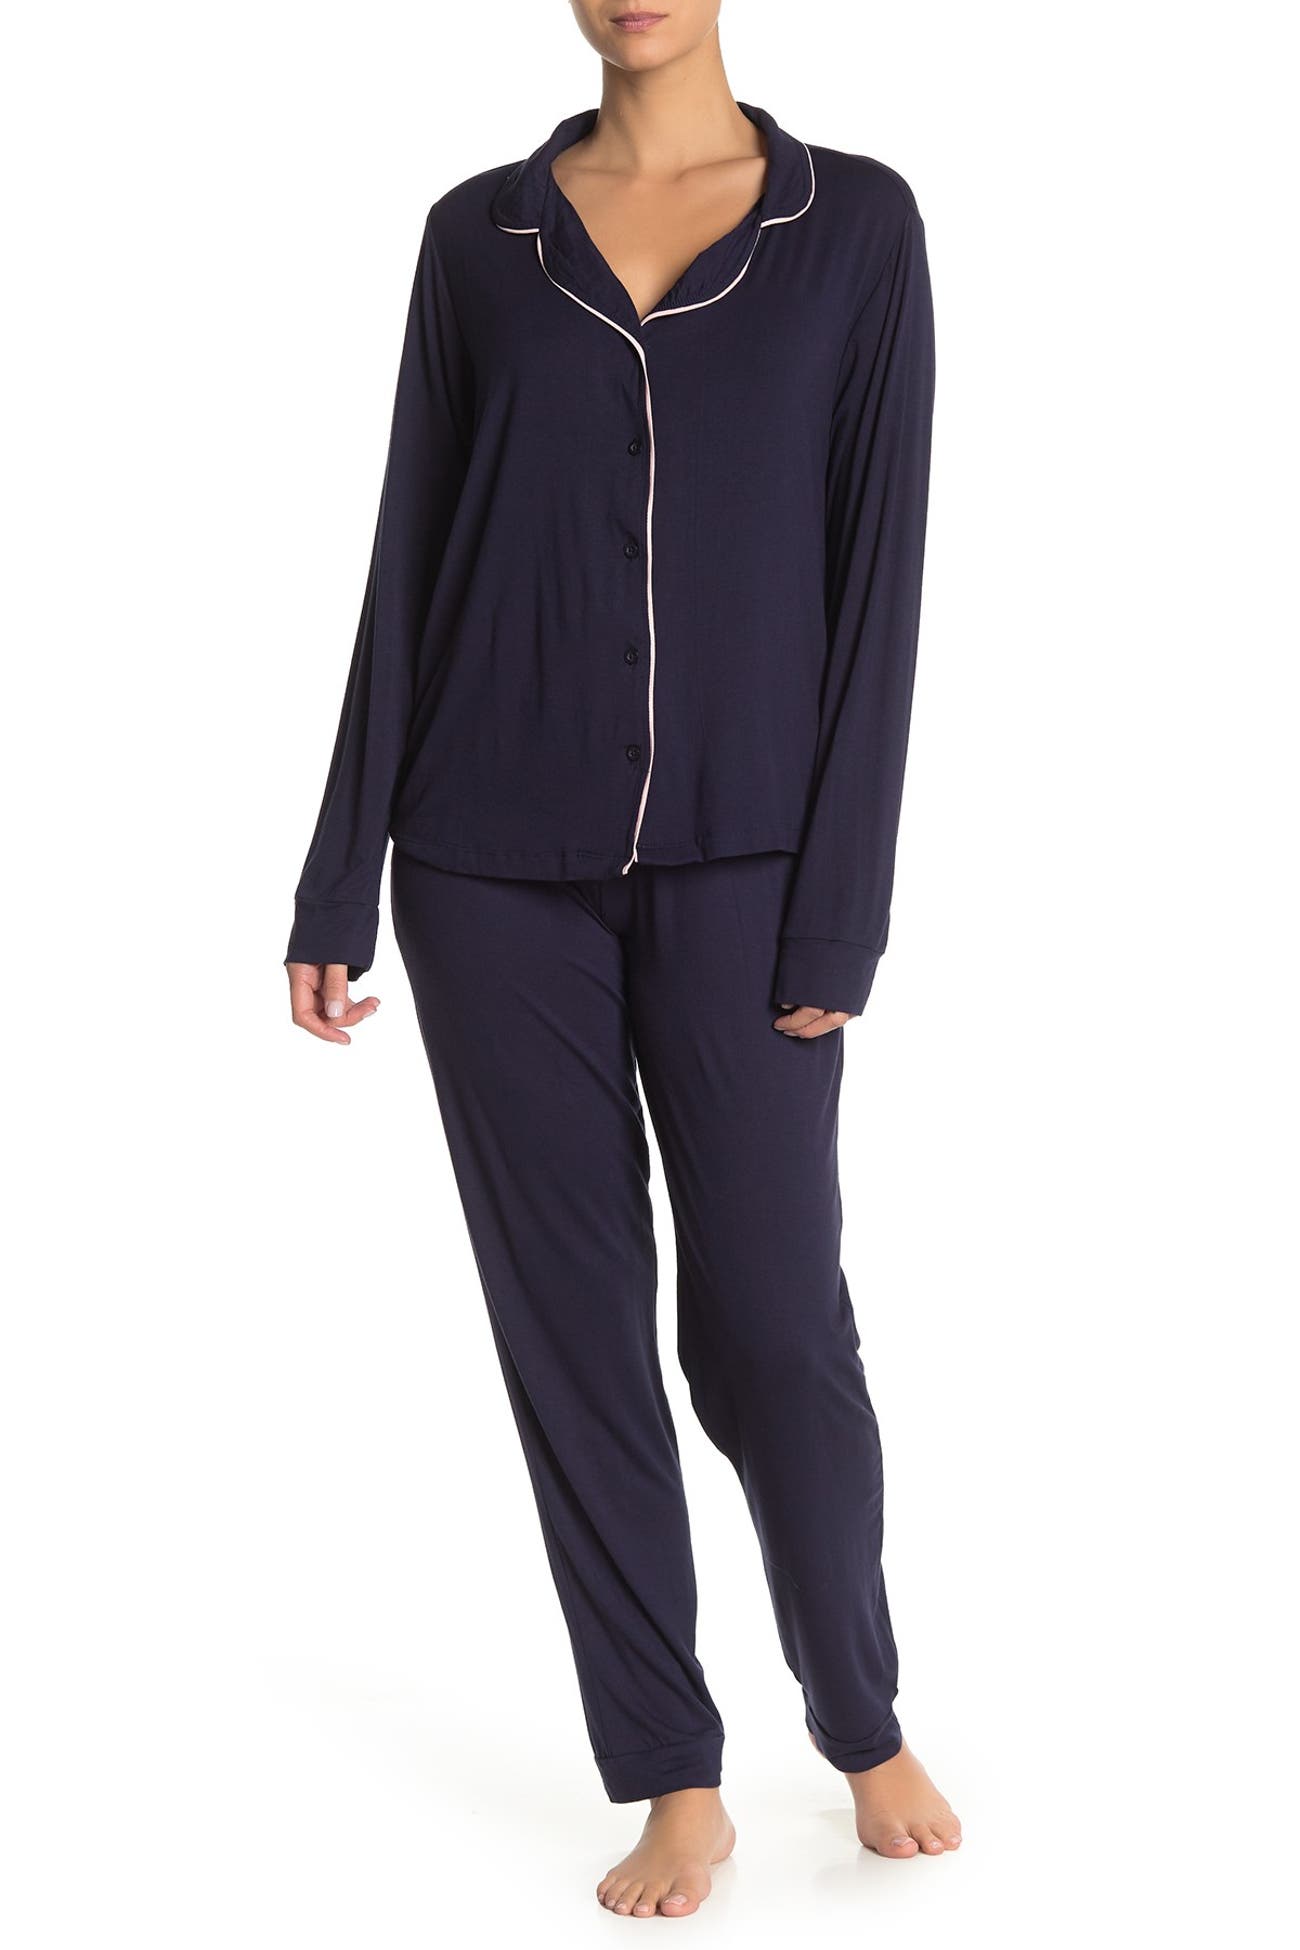 French Connection | Piped Trim Solid Pajama 2-Piece Set | Nordstrom Rack